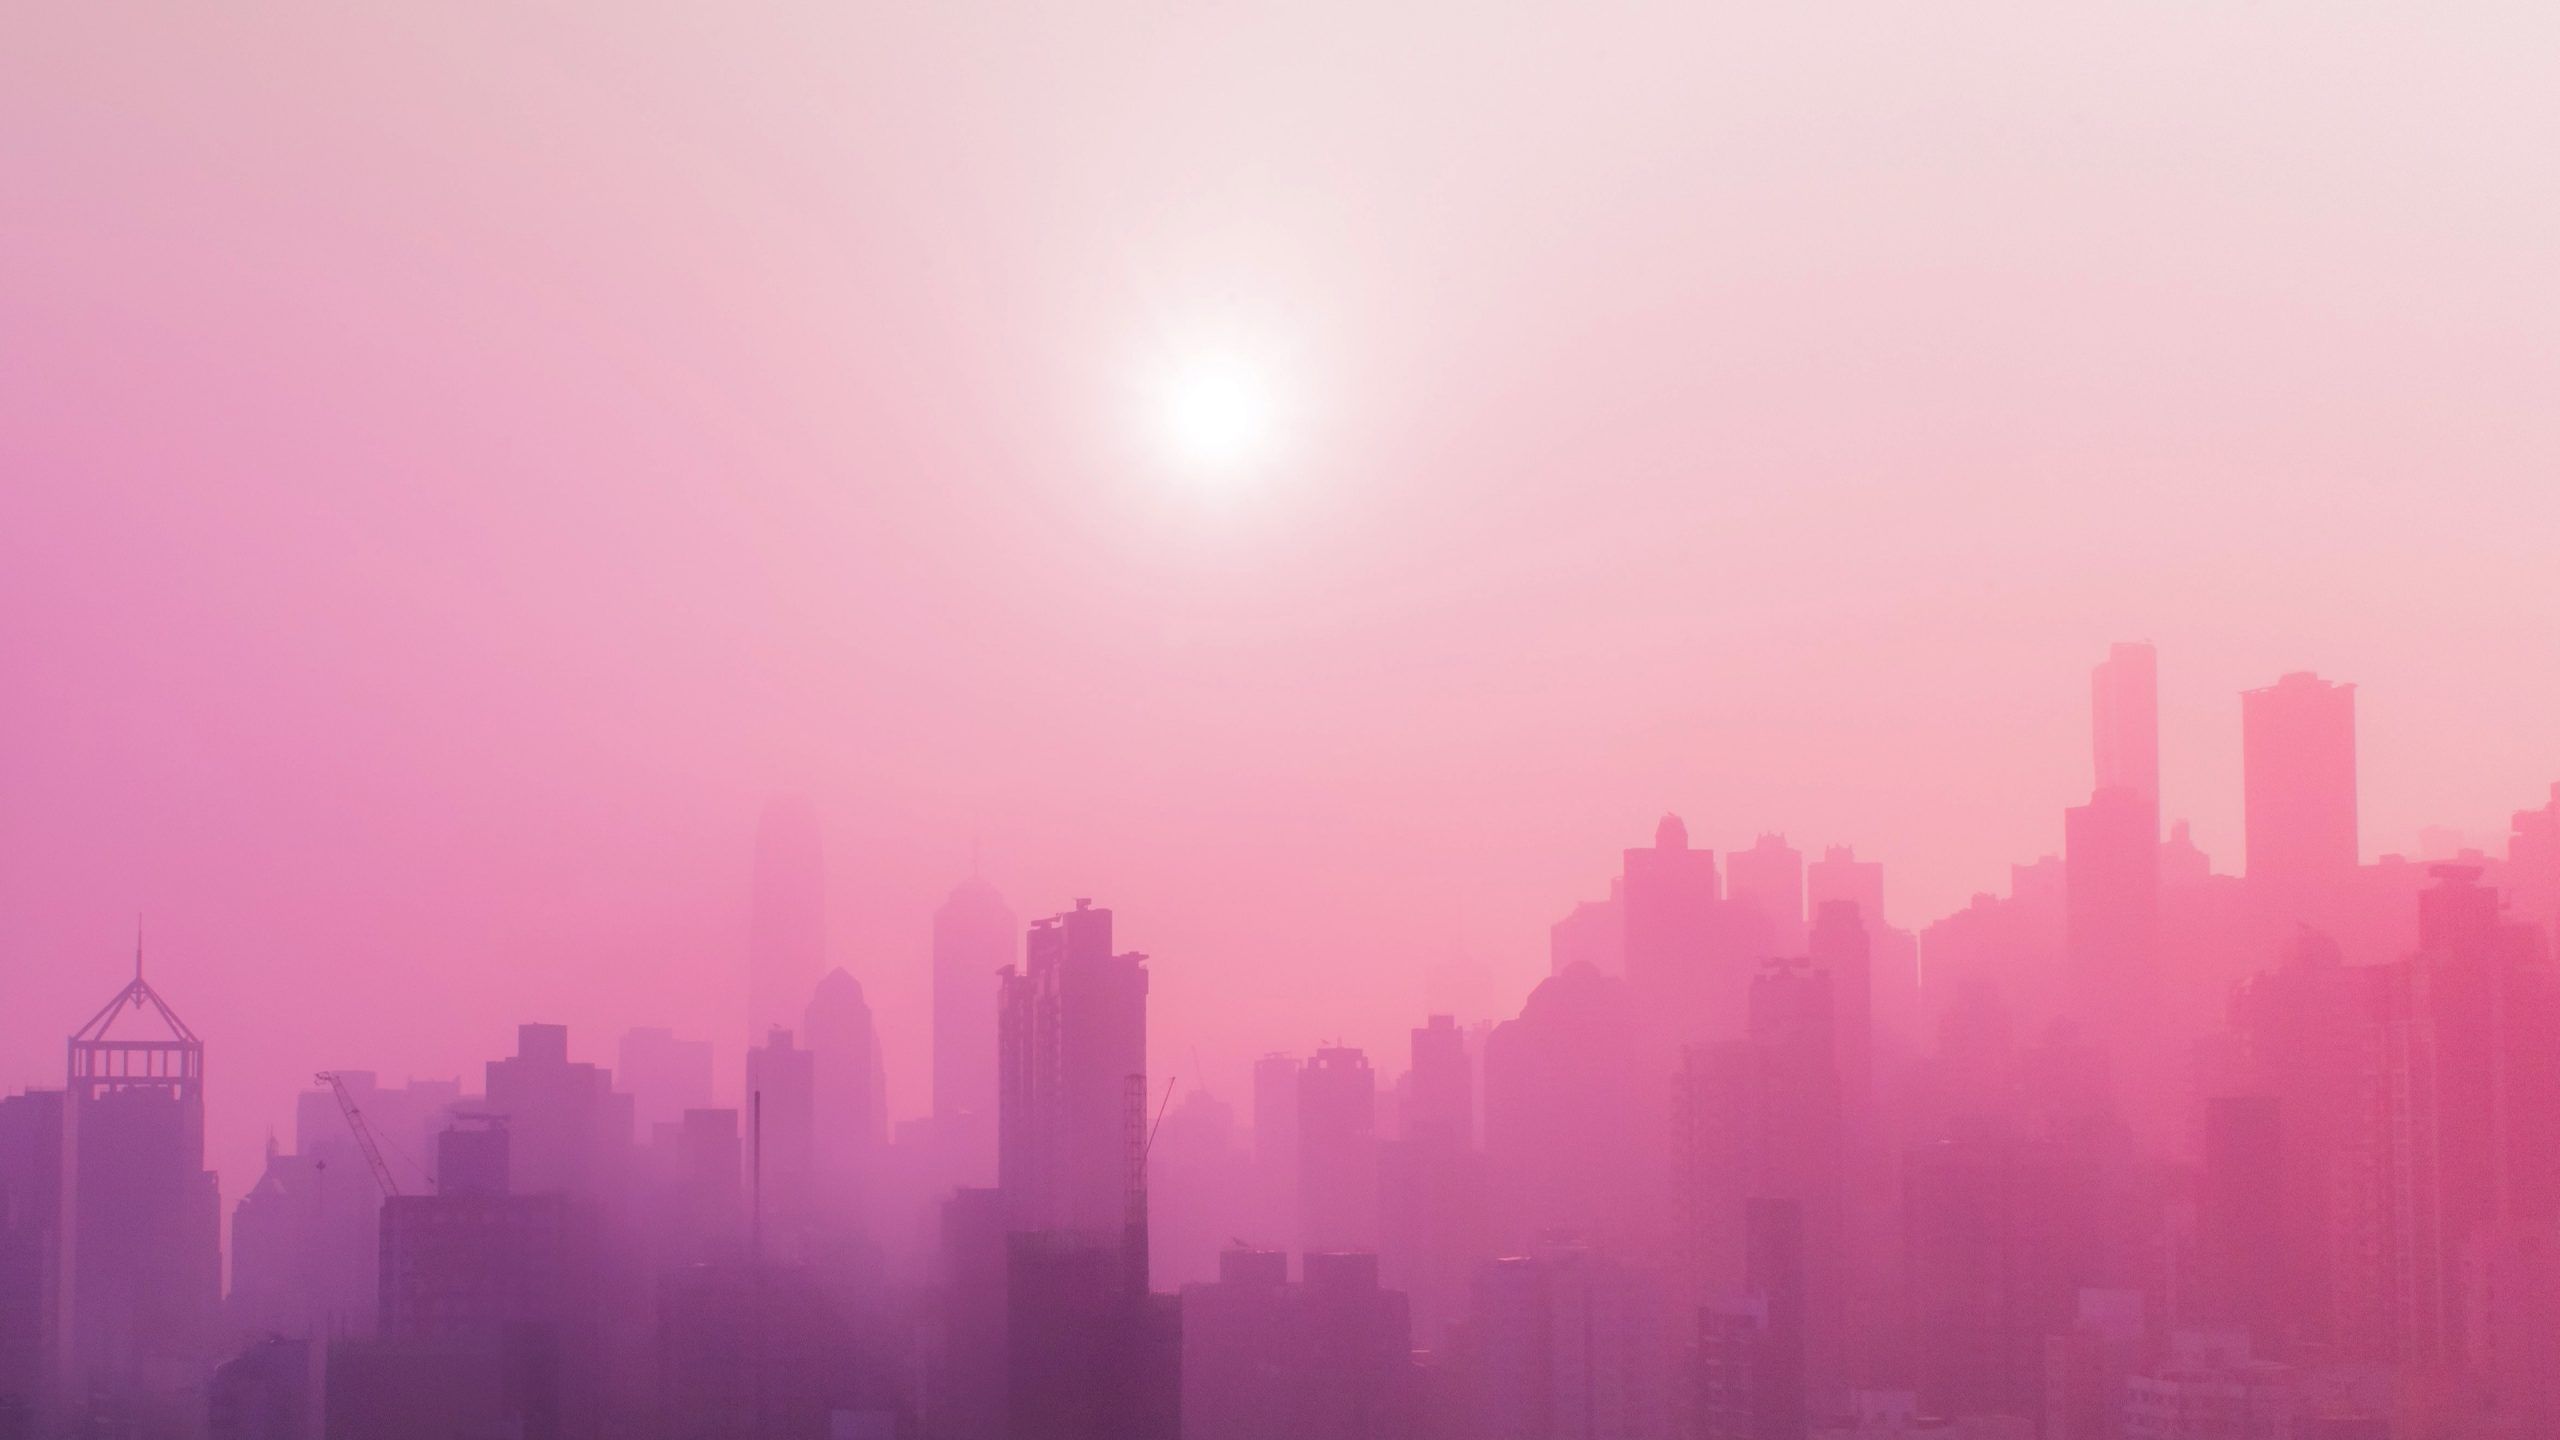 A city skyline is shown in a pink and purple hue. - Fog